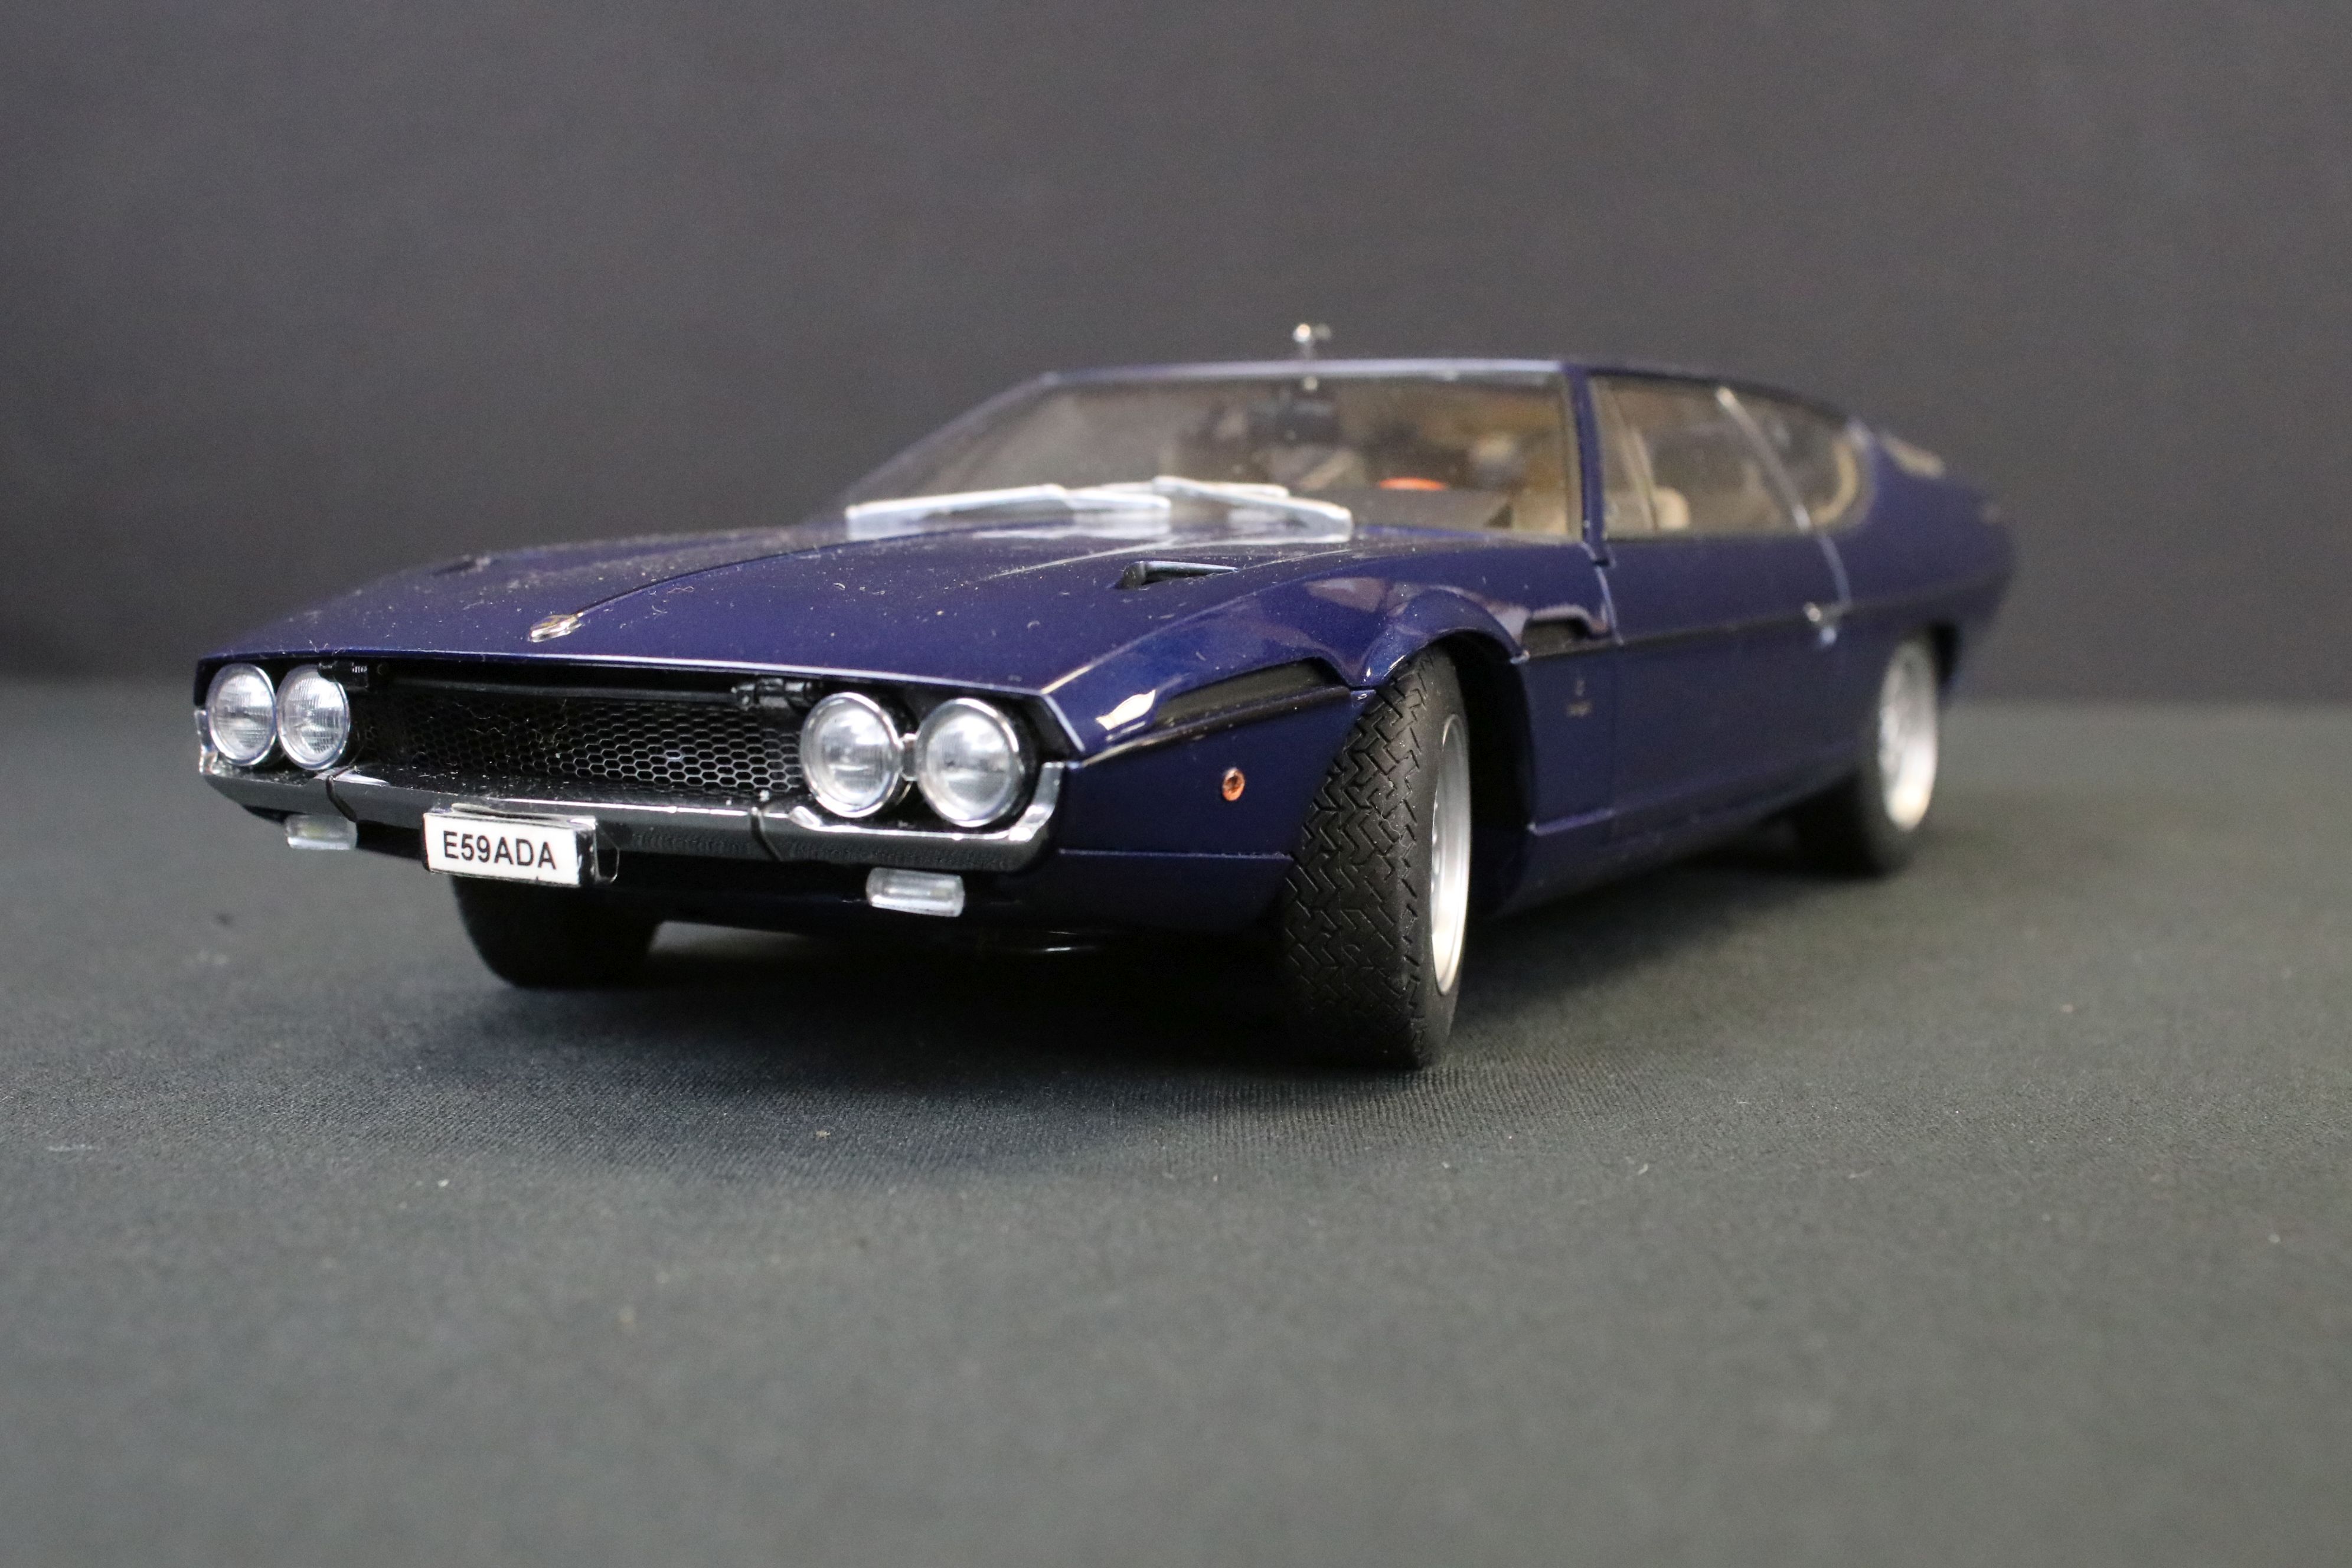 11 1/18 Scale diecast models to include 6 x AUTOart, 3 x Sun Star, Paul's Model Art Minichamps and - Image 44 of 47